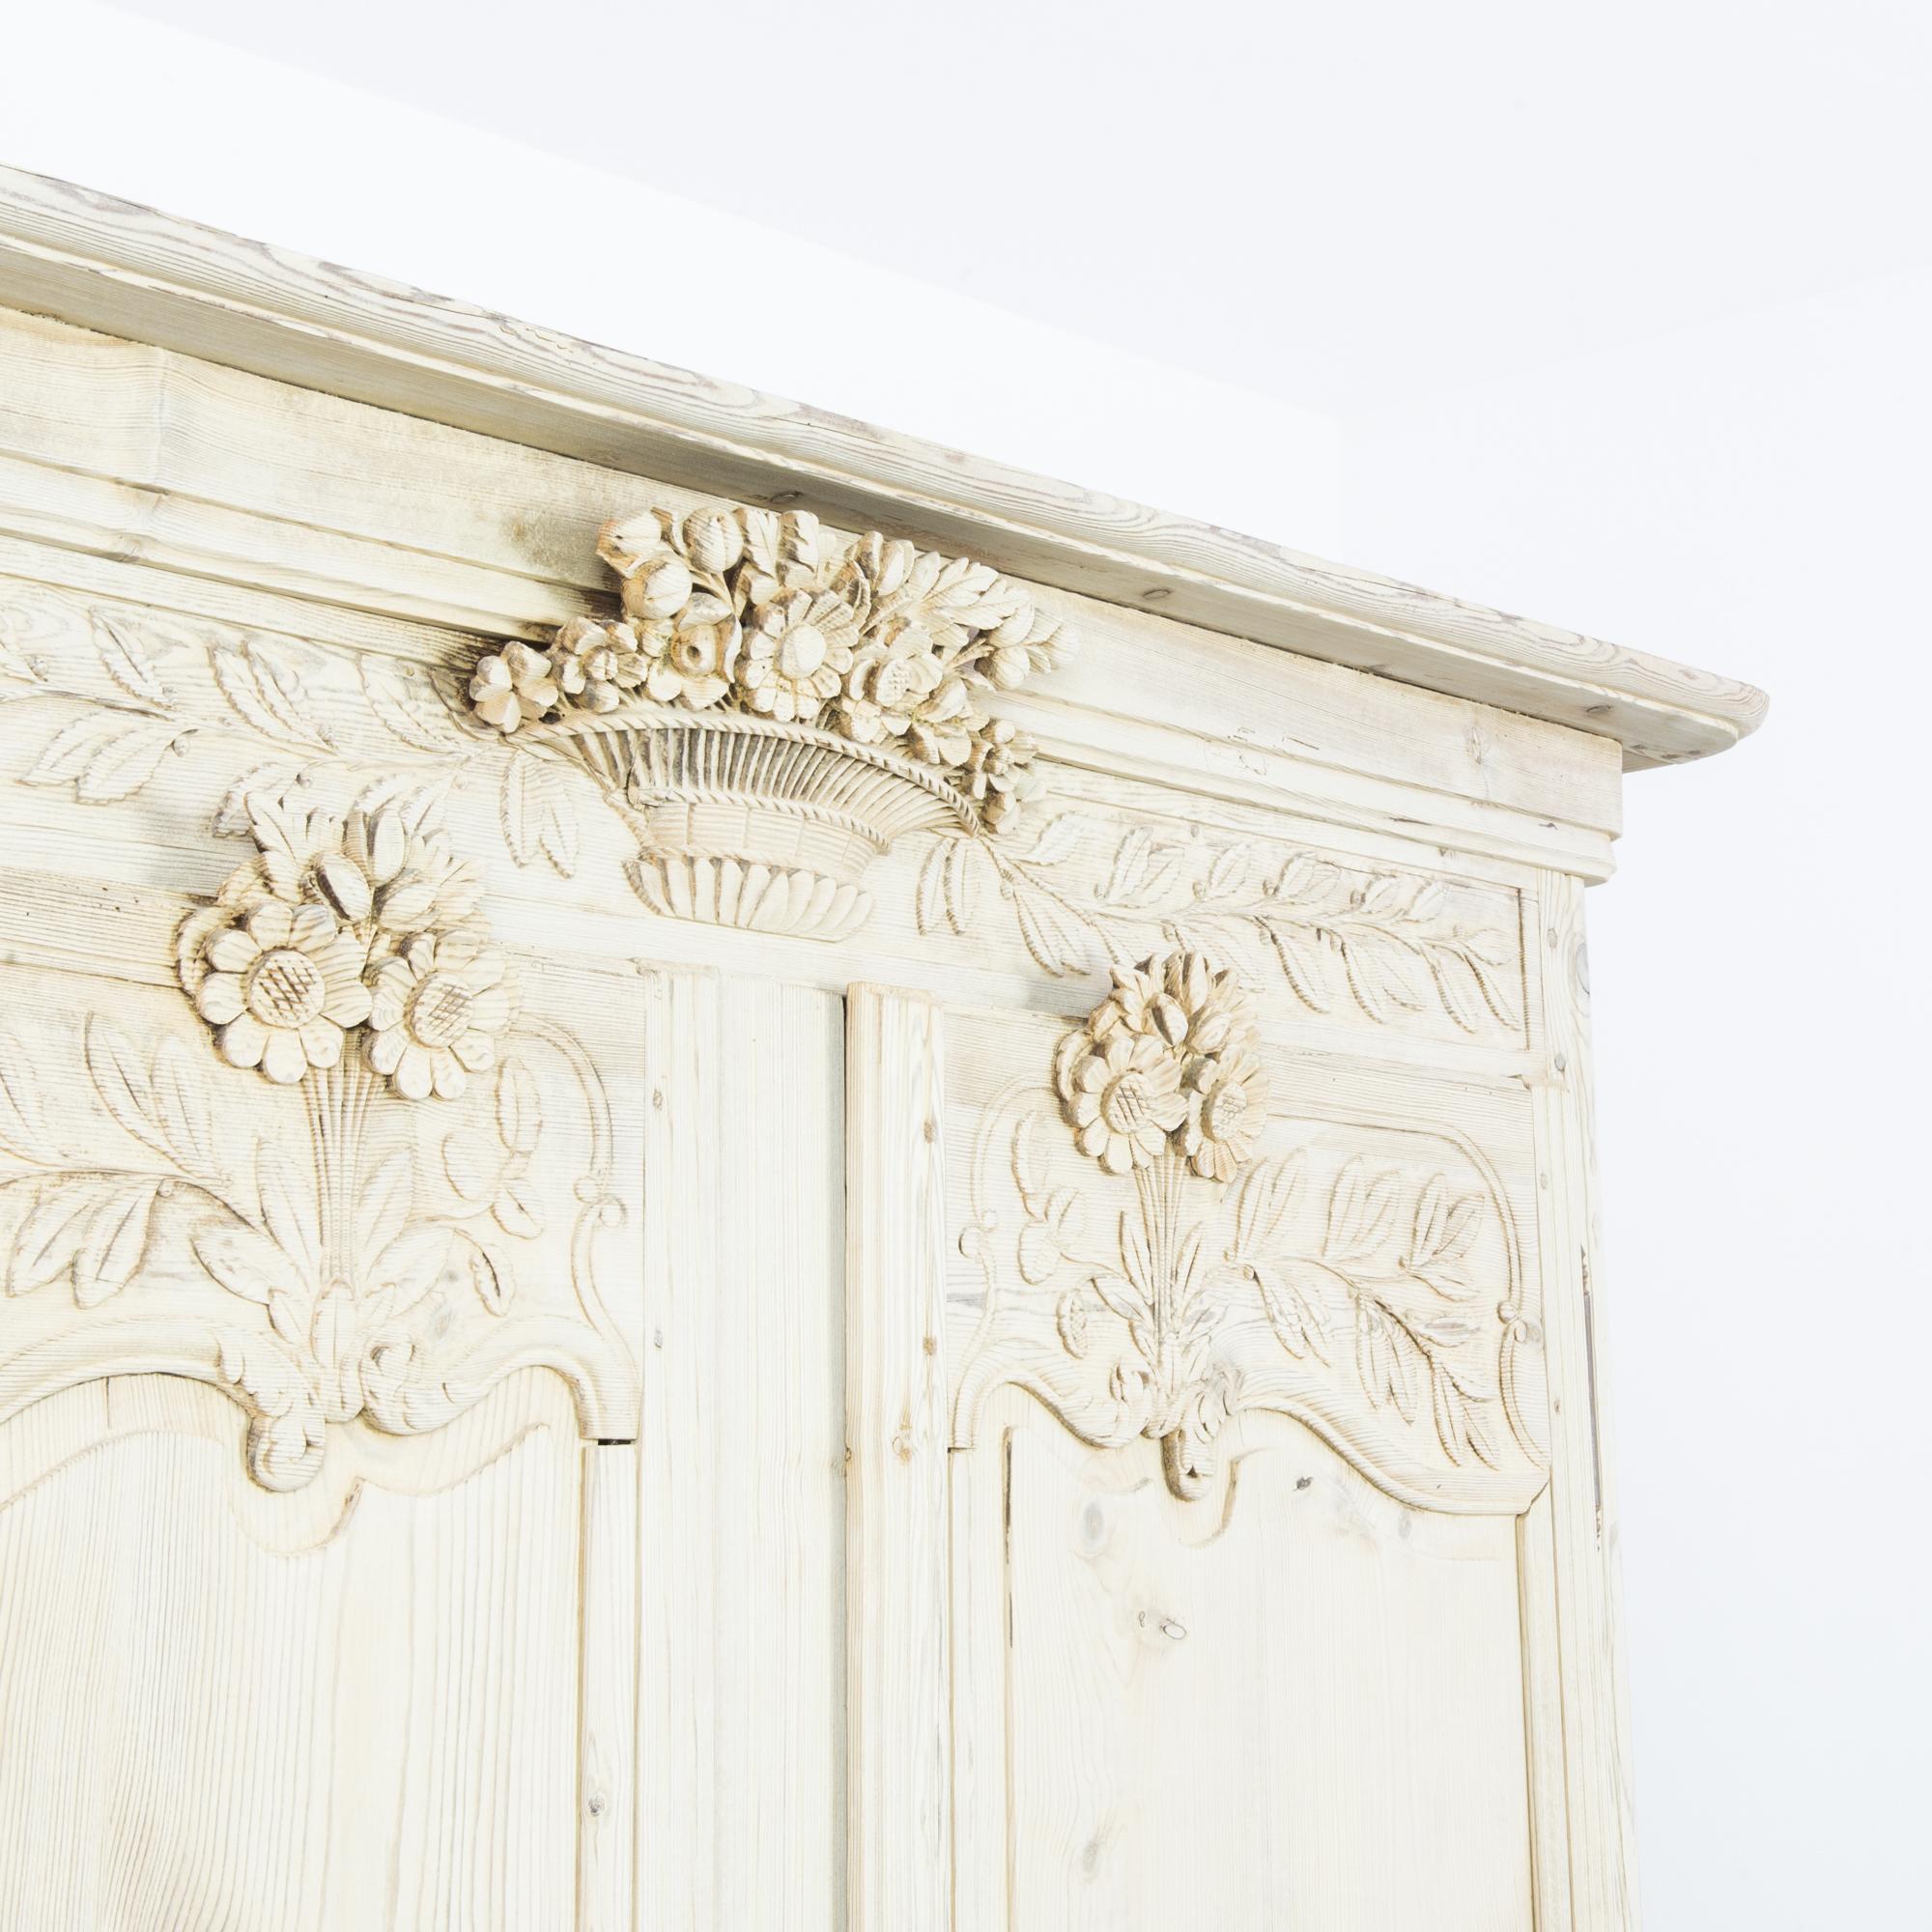 This wooden armoire made in France offers an old-world, rustic charm. With the elegantly contoured panels and the finely carved bouquets of flowers and leaves, the armoire is an impressive showcase of high-quality craftsmanship. The double doors,